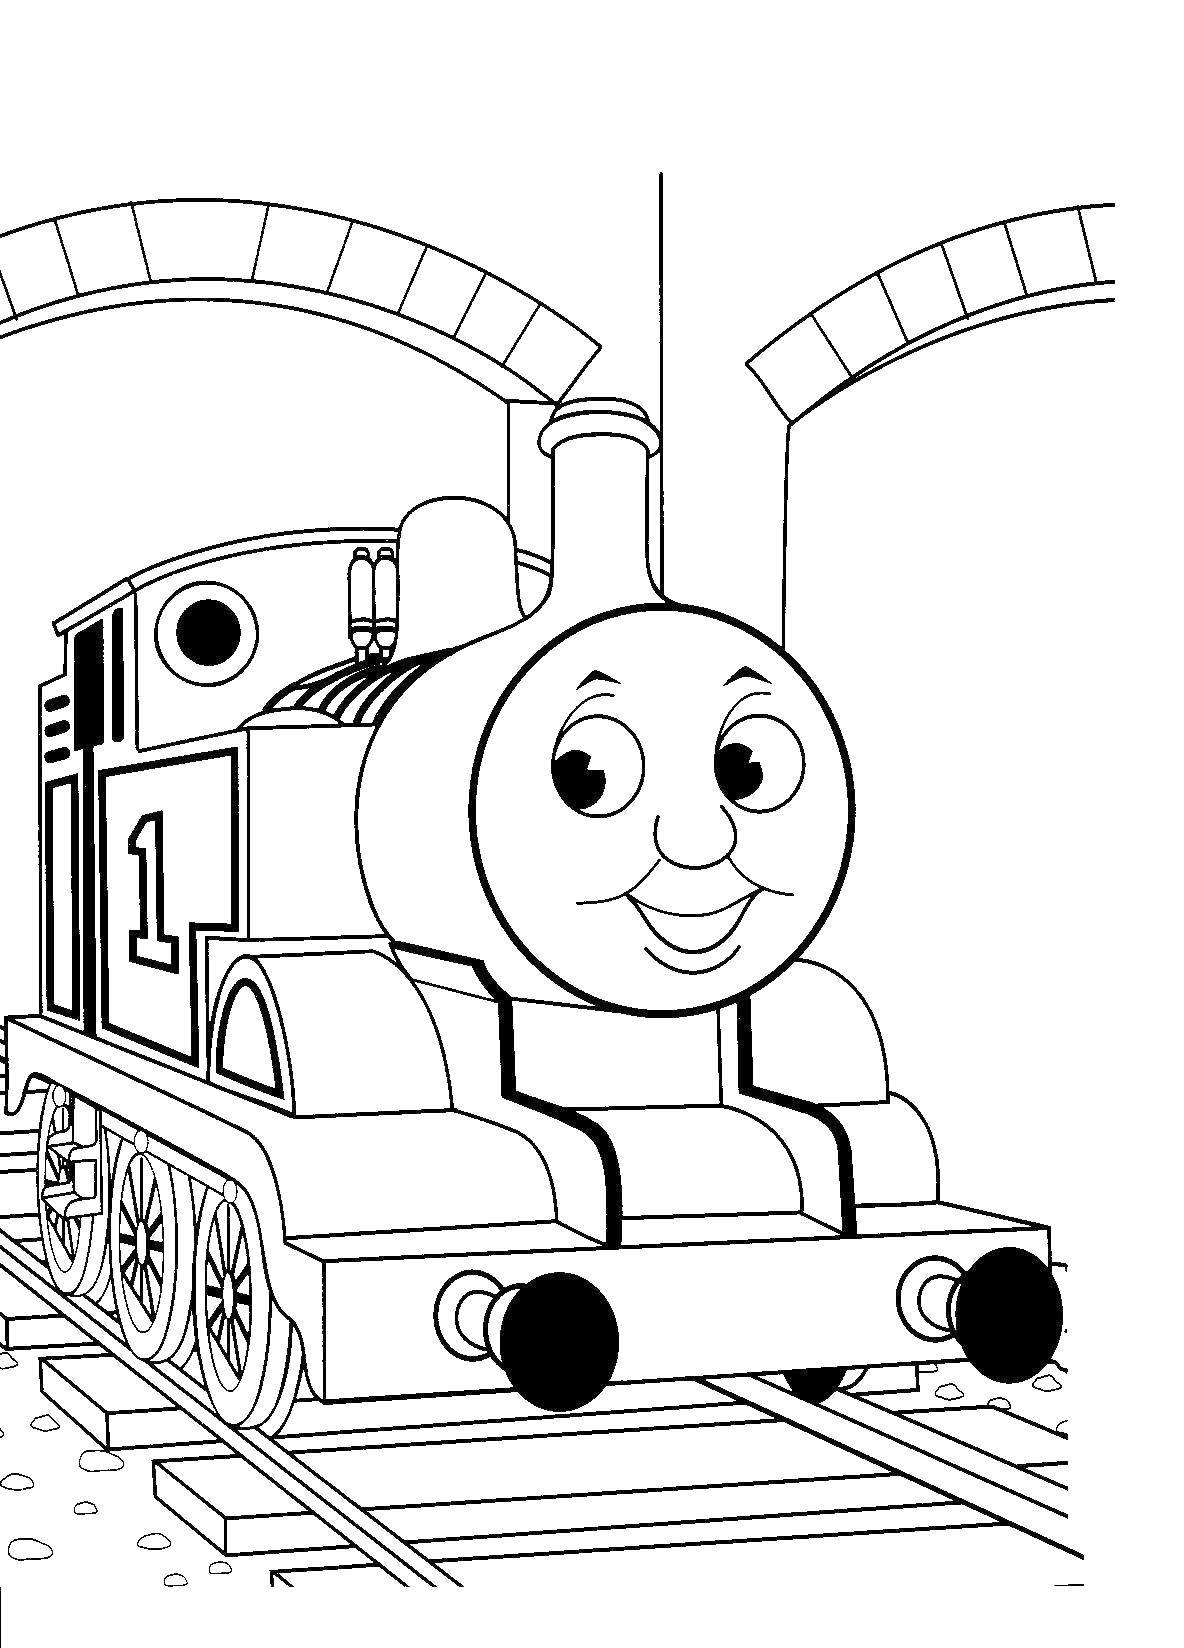 Coloring The little engine that. Category train. Tags:  Train, Tom.